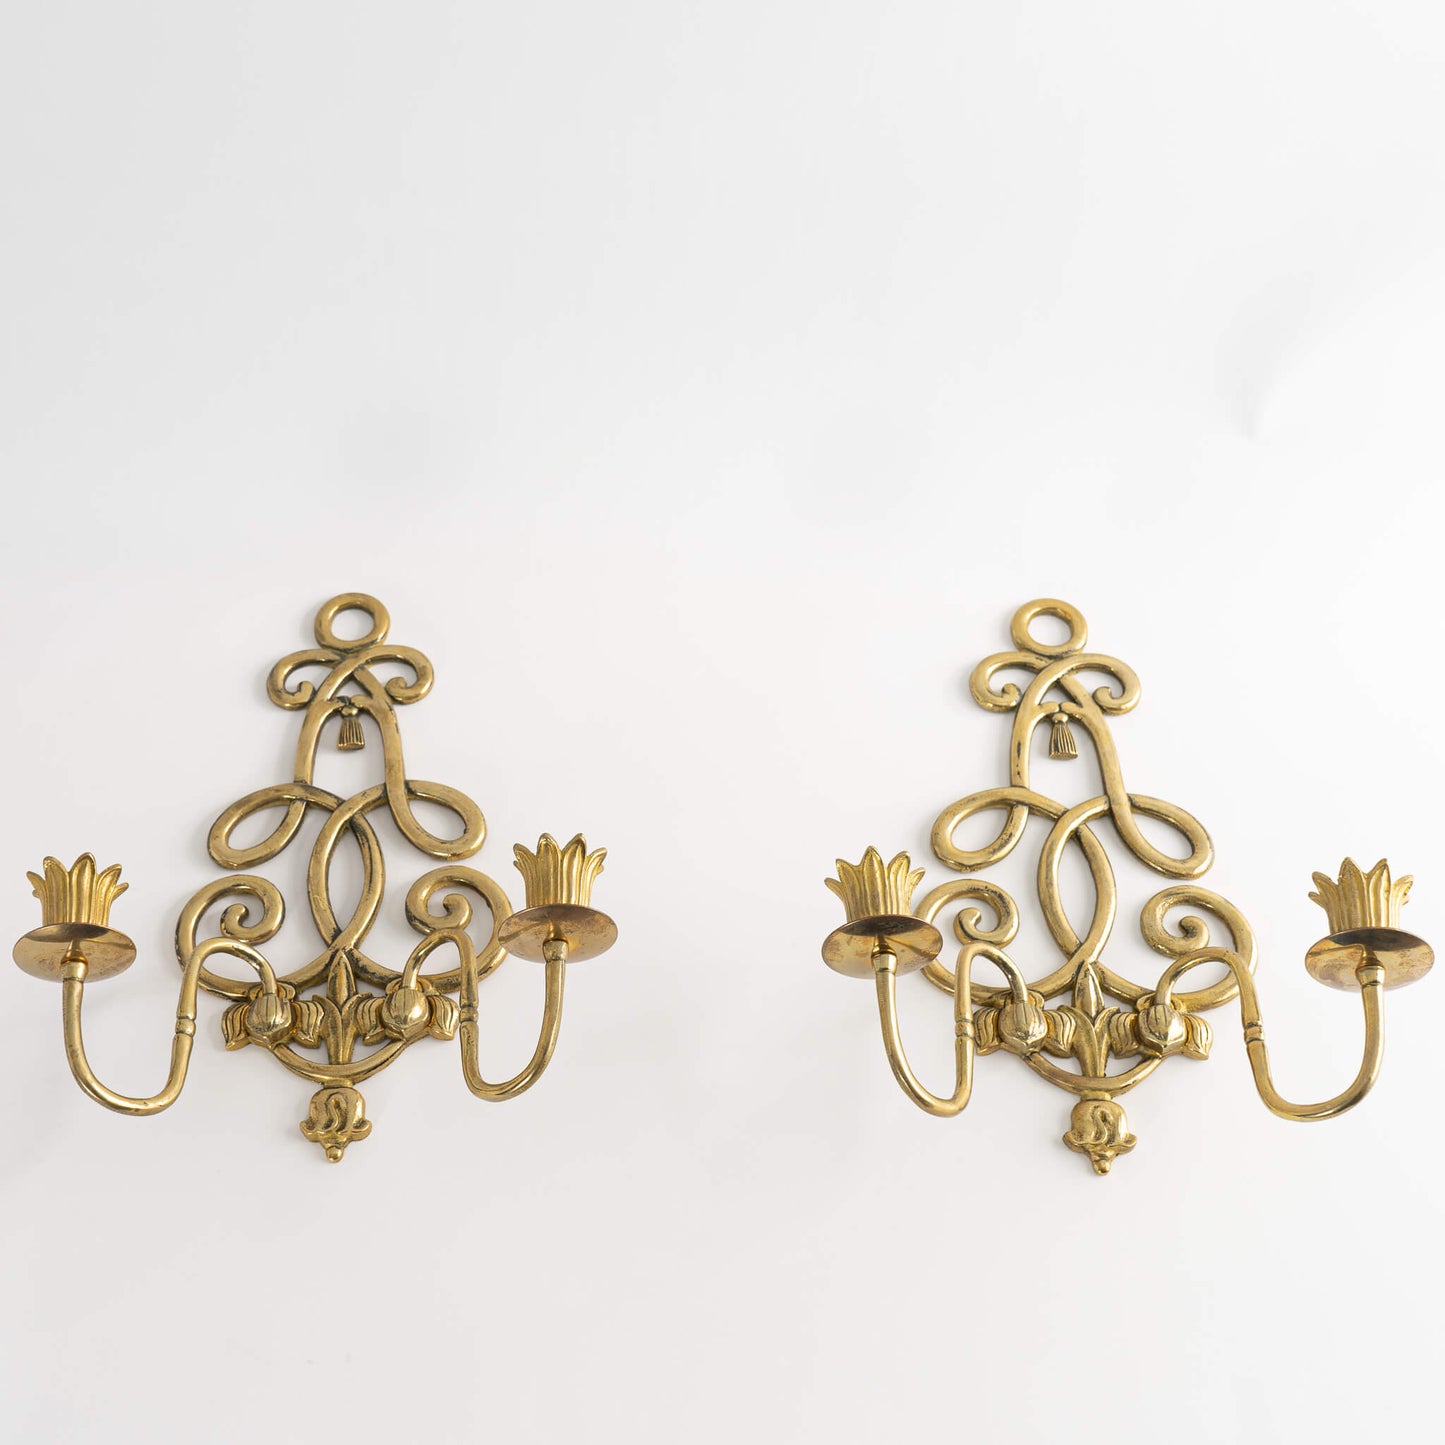 Vintage Brass Candle Holder Wall Sconce - A Pair